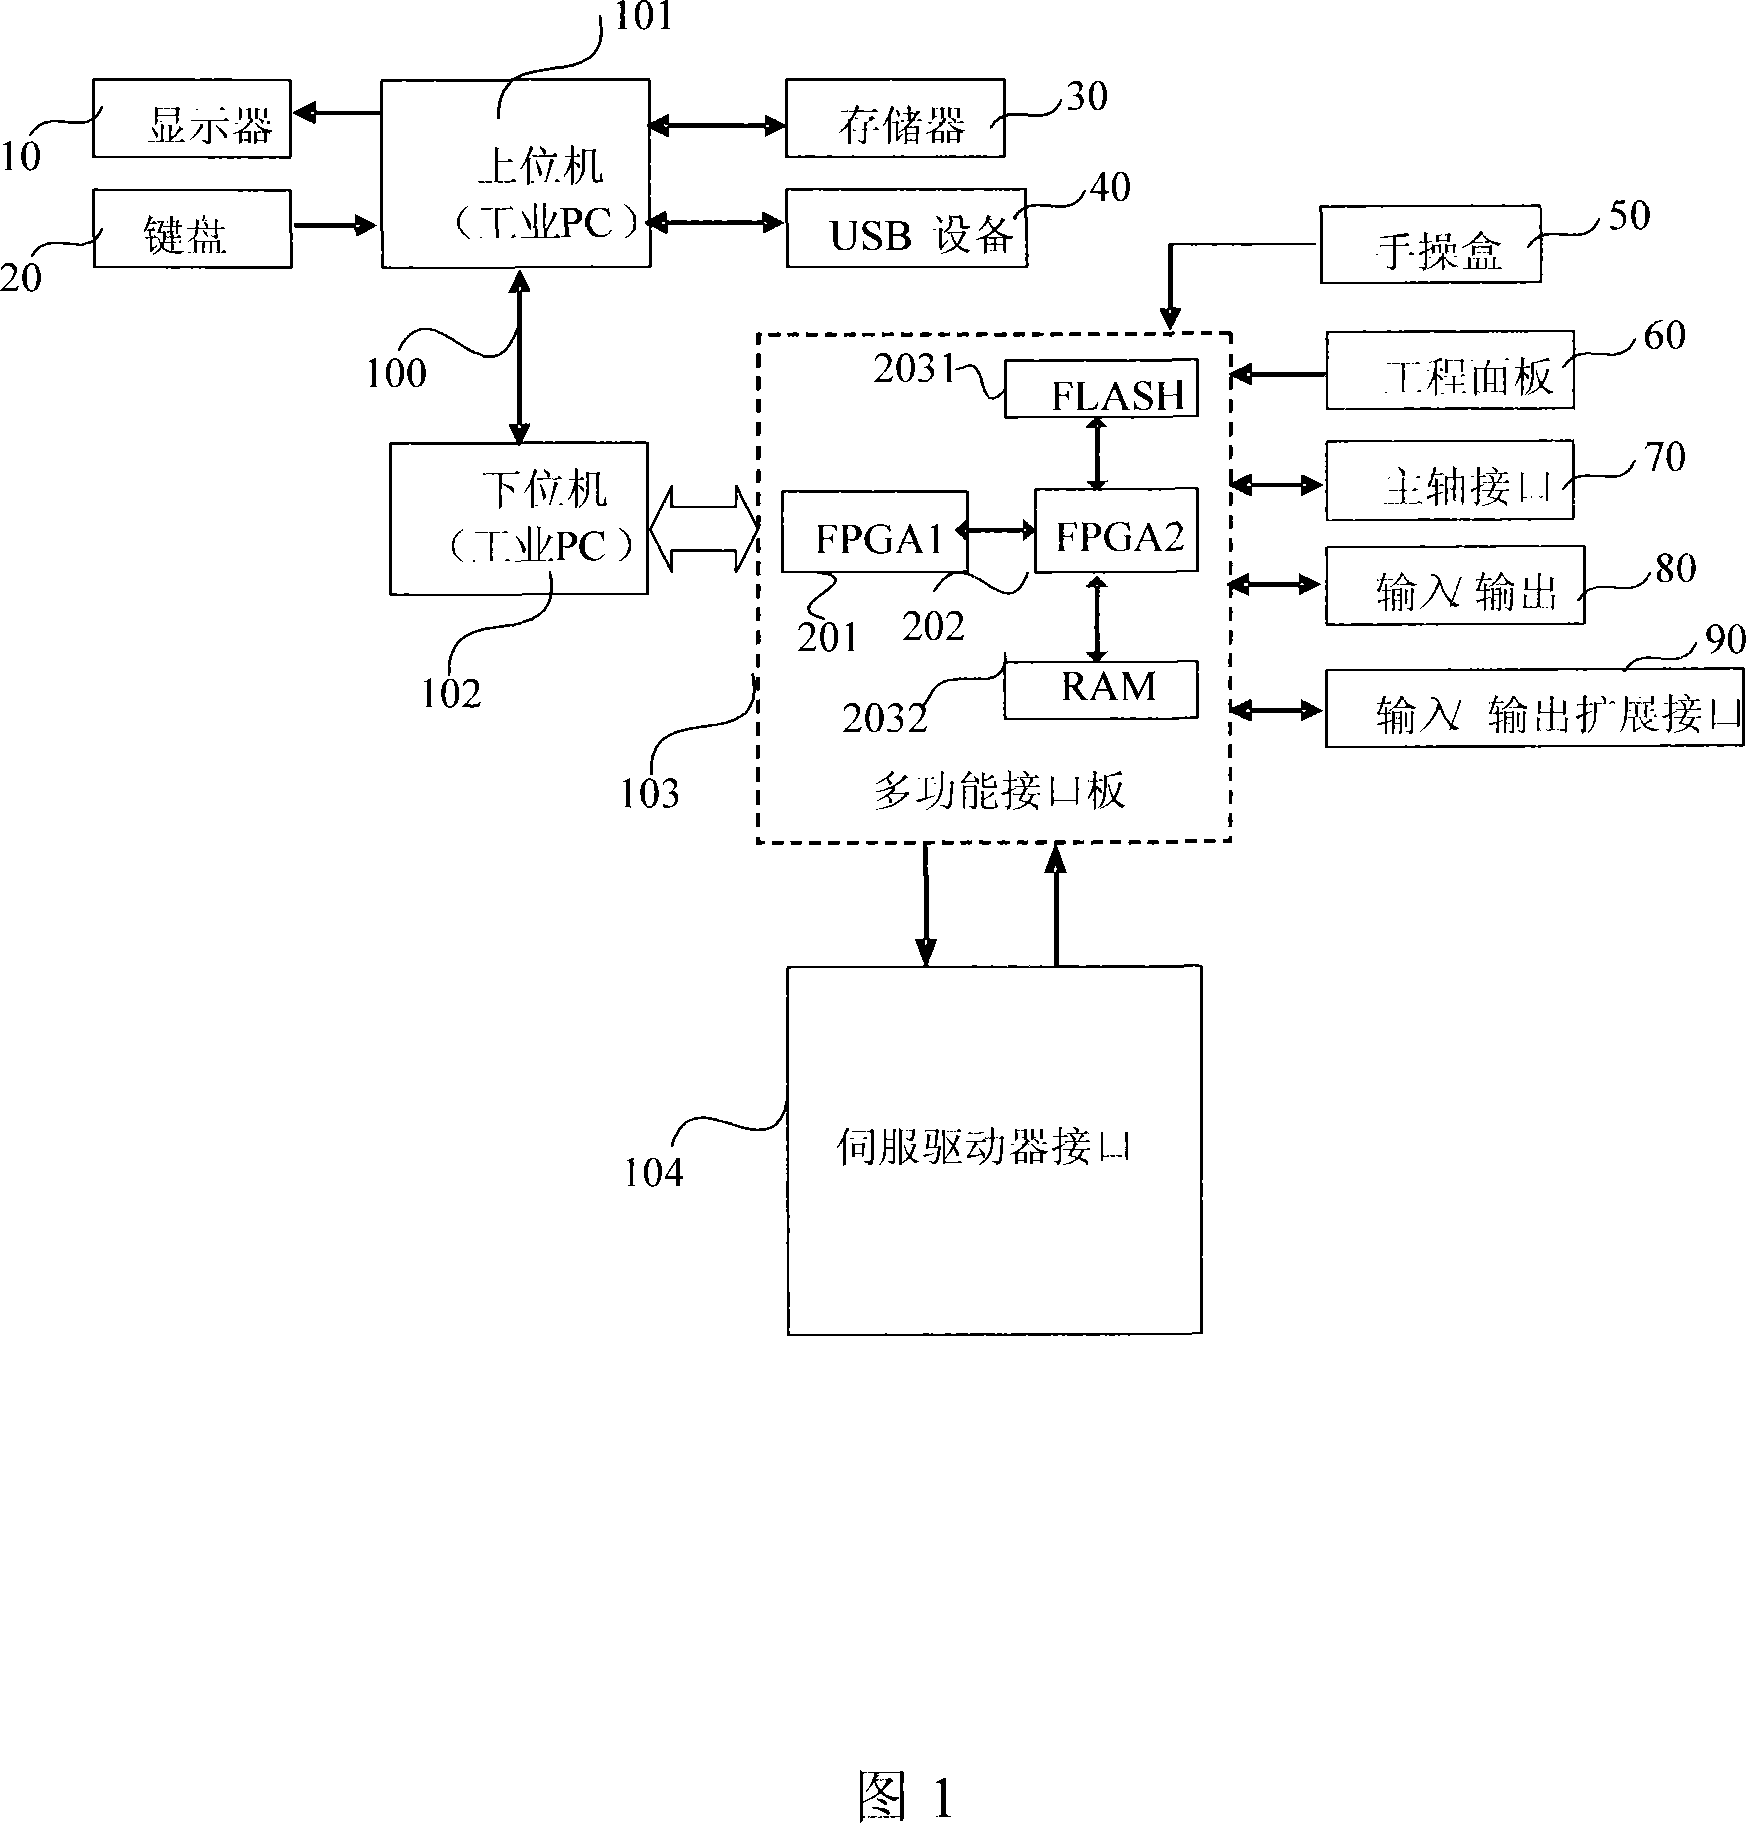 Distributed type open system structure digital control system